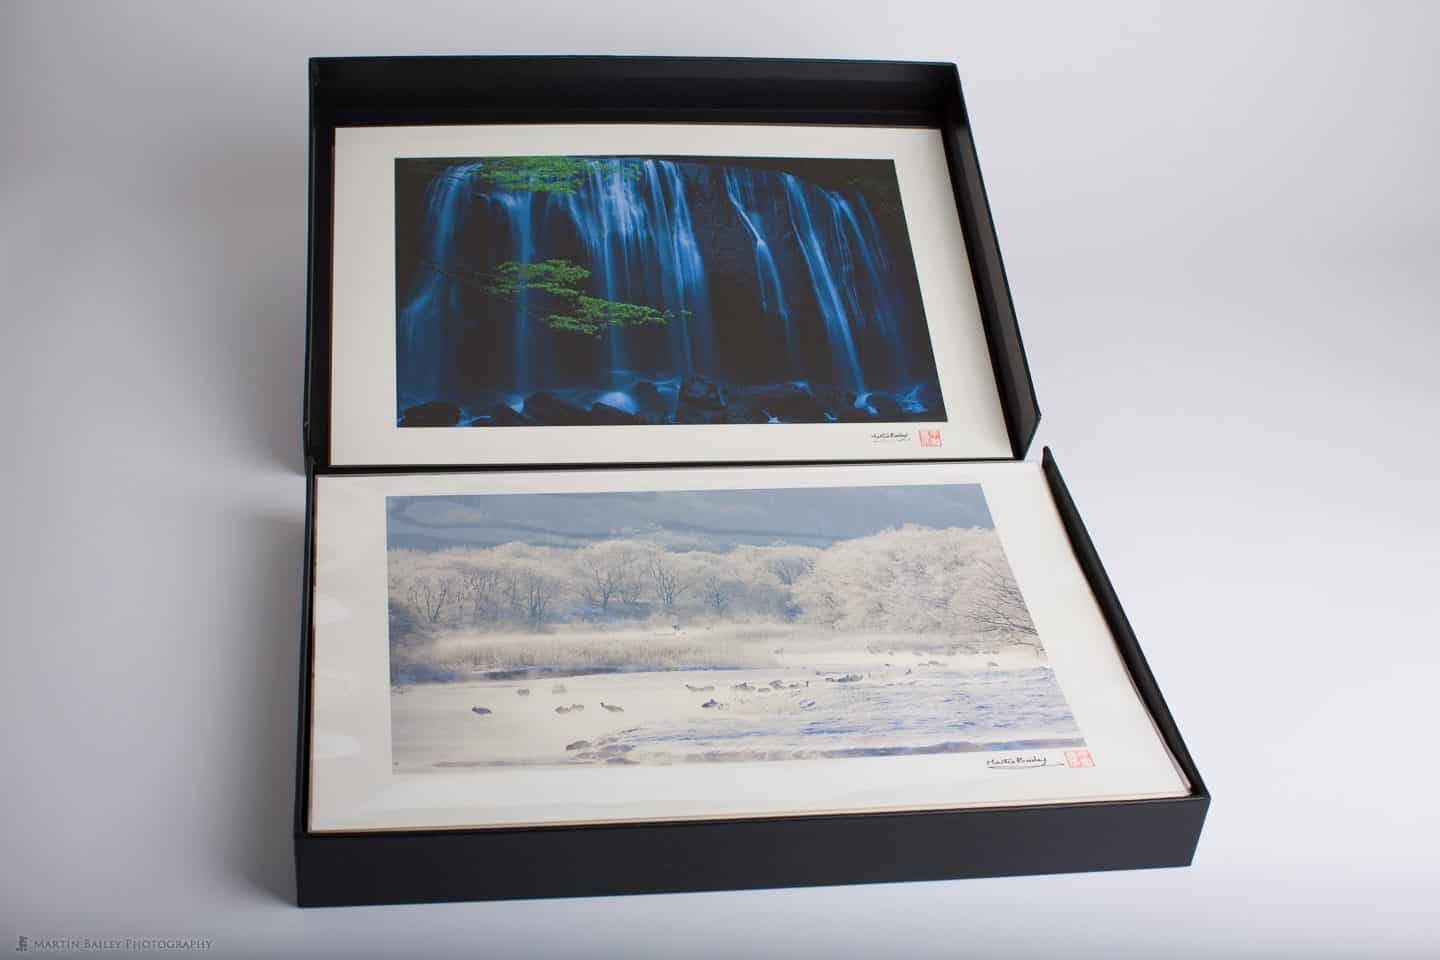 13 x 19" Prints in Polypropylene Sleeves and Clamshell Storage